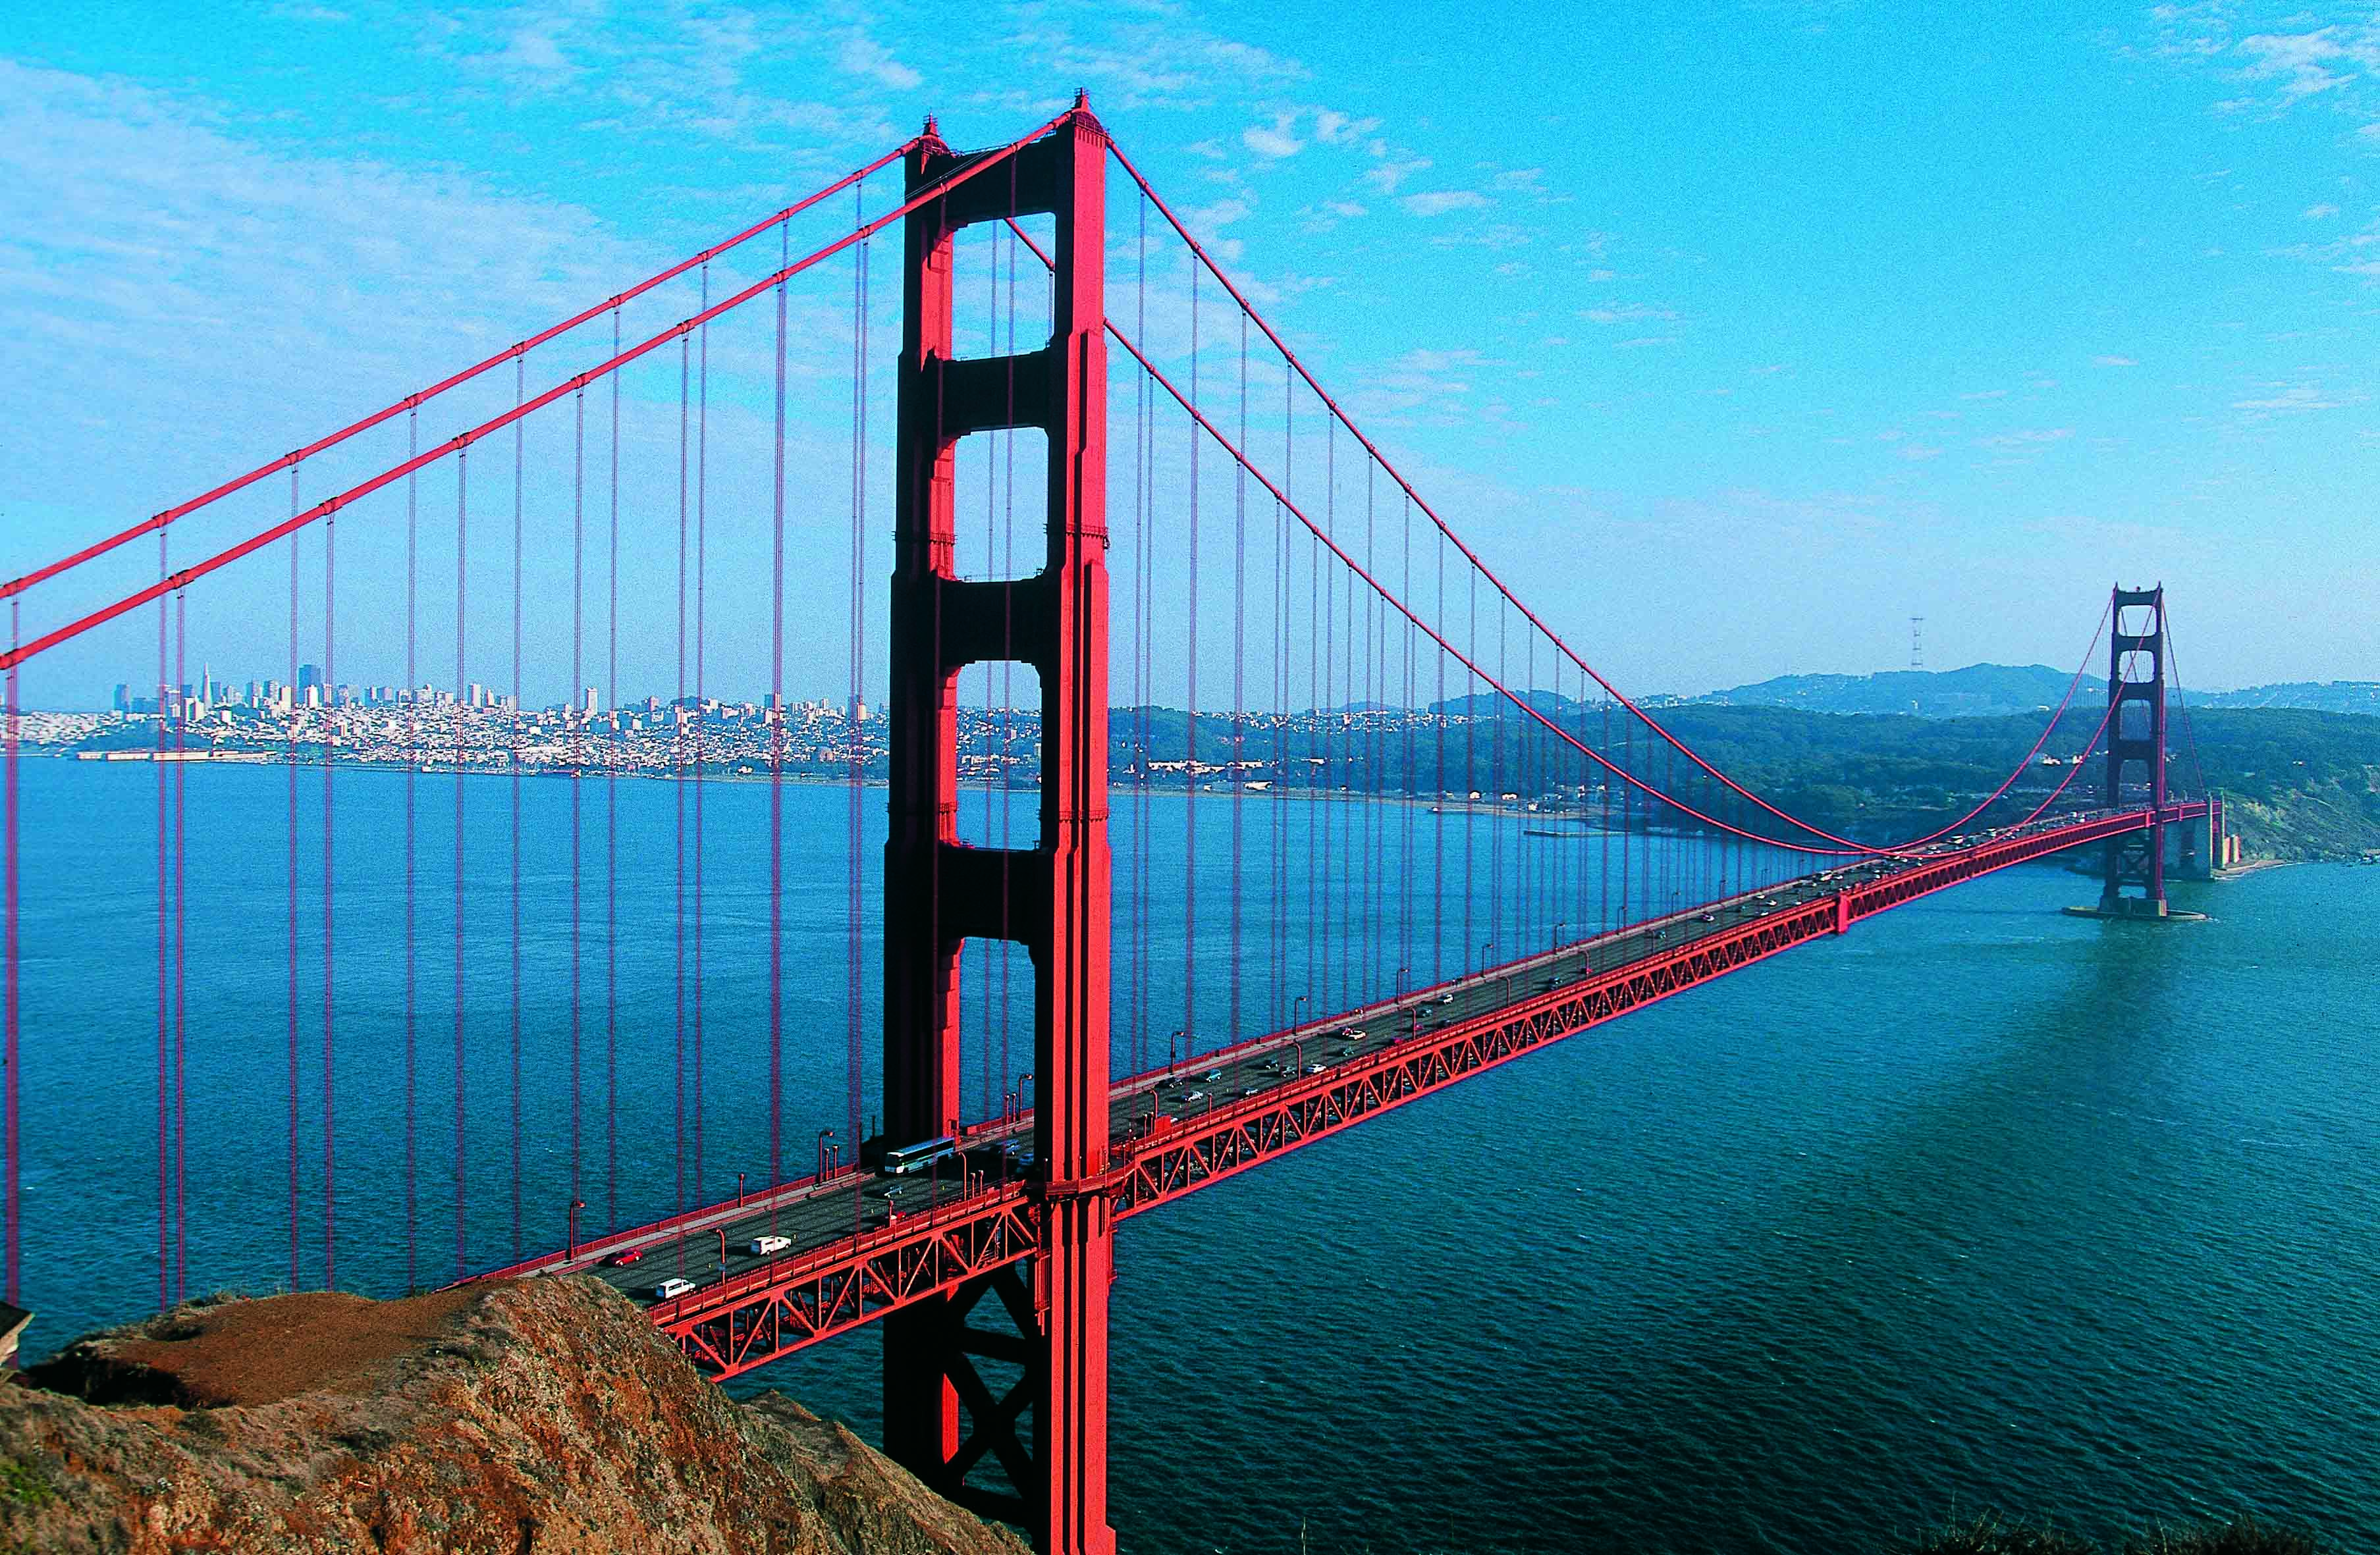 Beautiful Picture Of The Golden Gate Bridge In San Francisco